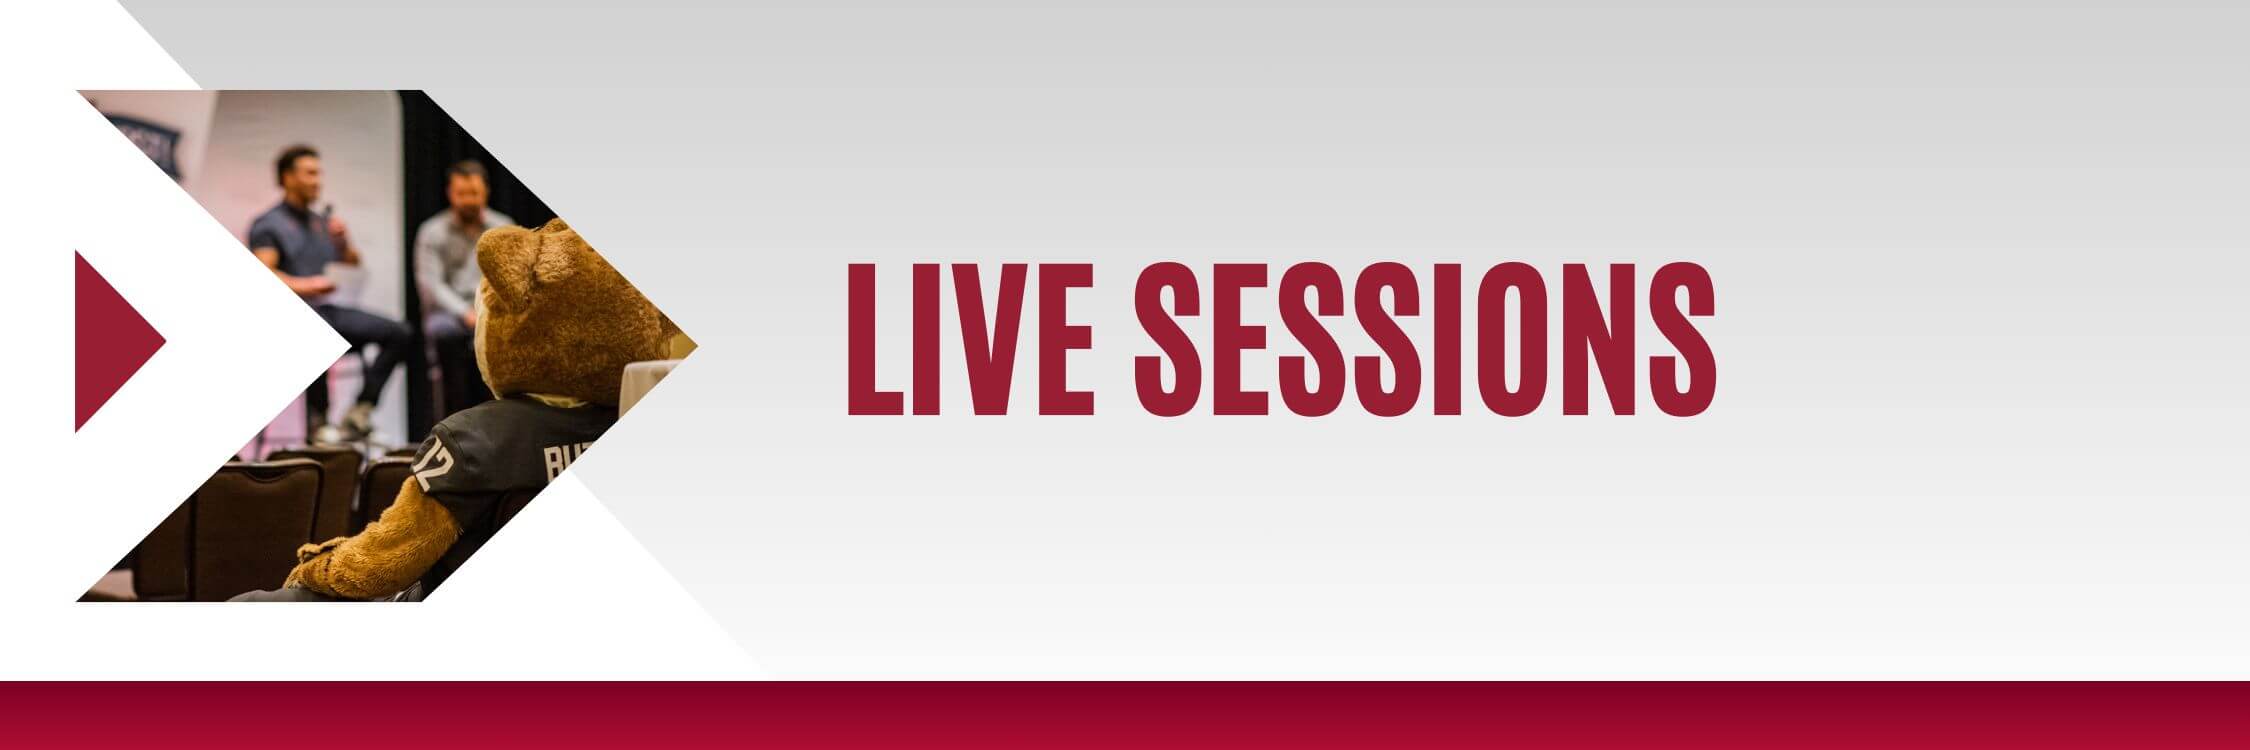 LiveSessions_1500x500